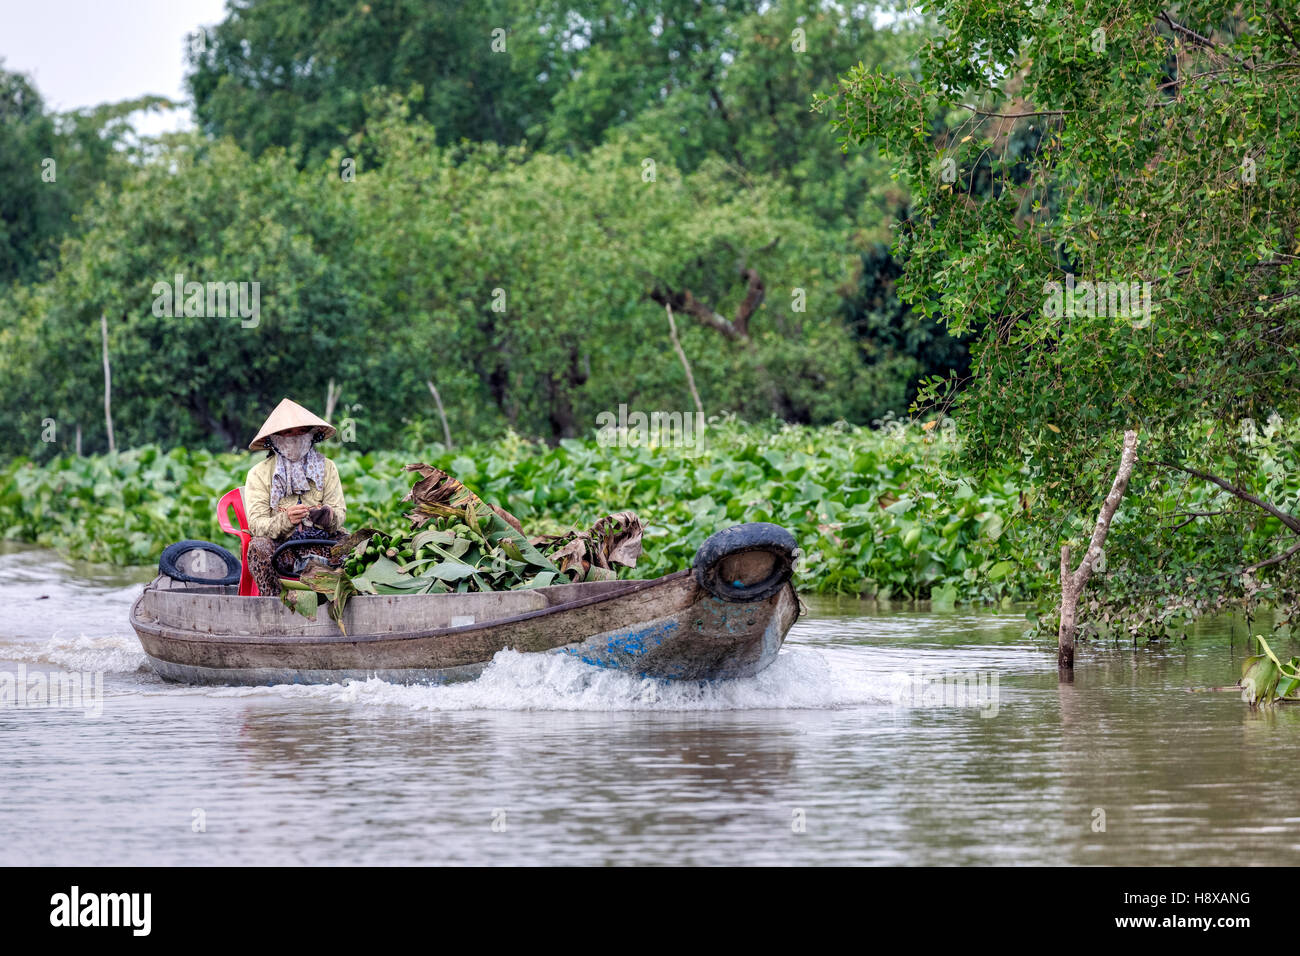 woman transporting bananas to the market in a sampan boat on the Mekong River in Cai Be, Mekong Delta, Vietnam, Asia Stock Photo